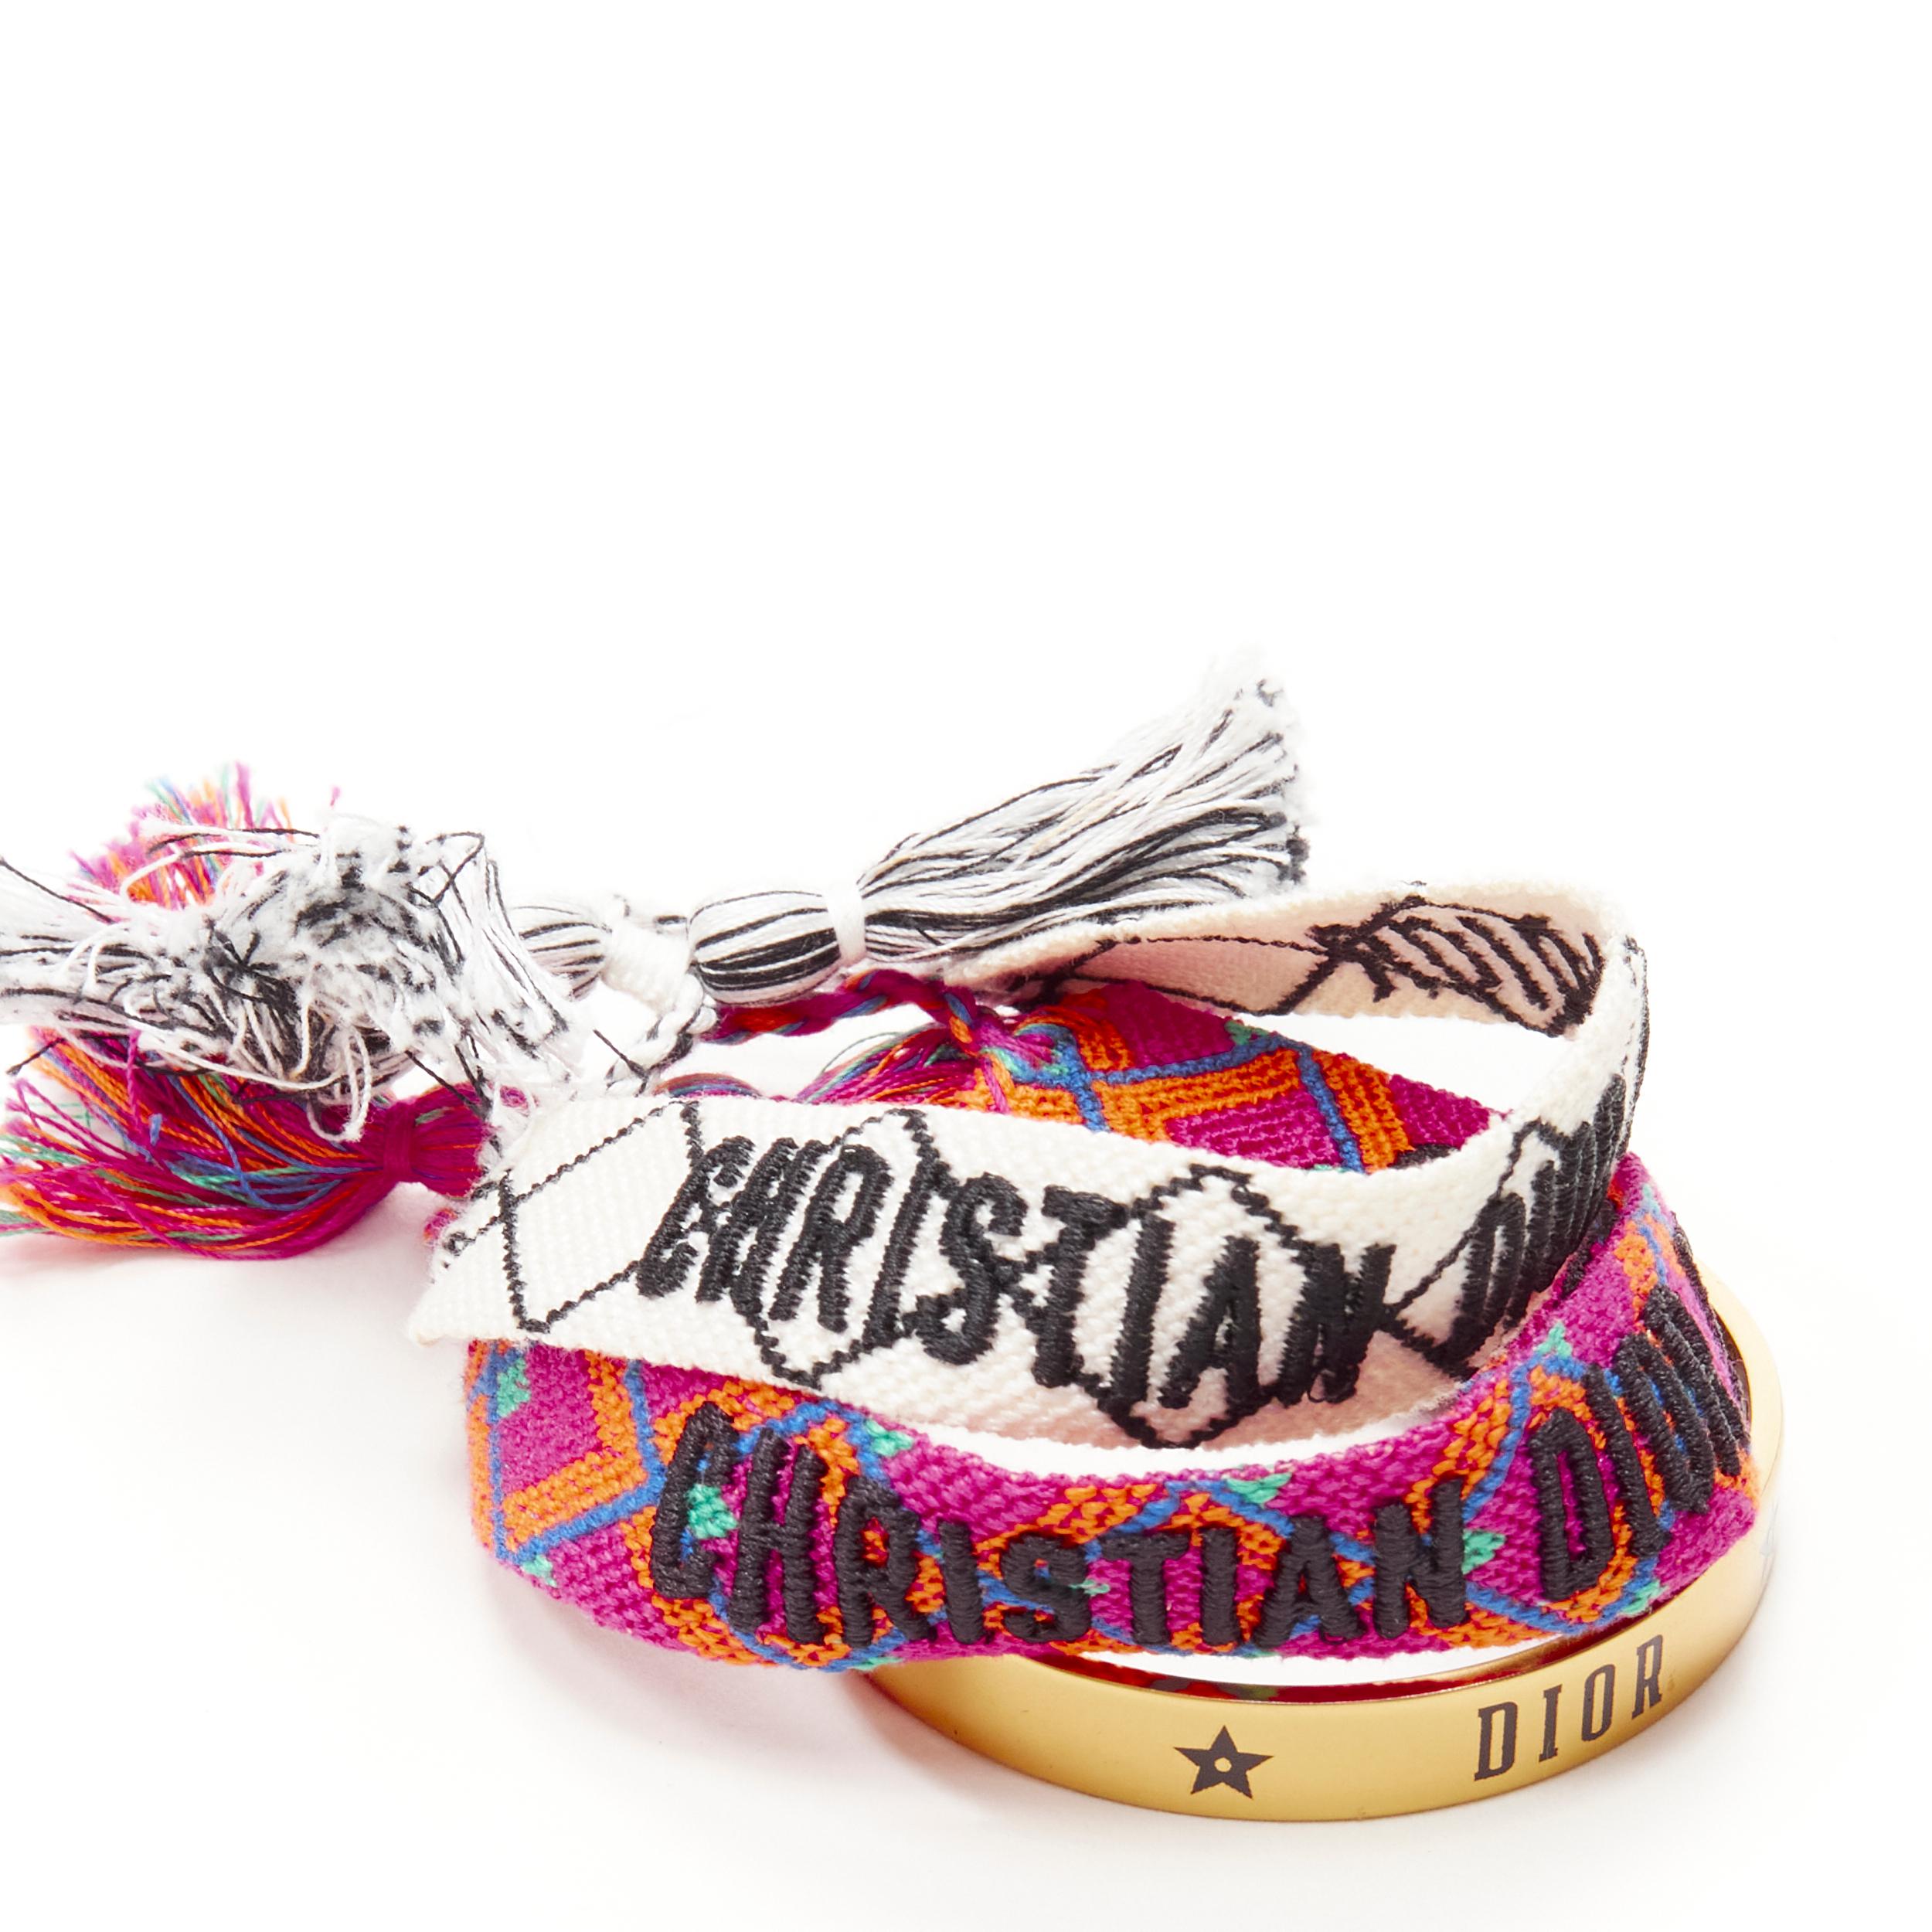 CHRISTIAN DIOR white pink ethnic J'Adior woven friendship bracelet gold cuff 
Reference: ANWU/A00162 
Brand: Christian Dior 
Material: Fabric 
Color: Gold 
Pattern: Multi 
Extra Detail: Signature Friendship woven bracelet with J'adior Christian Dior